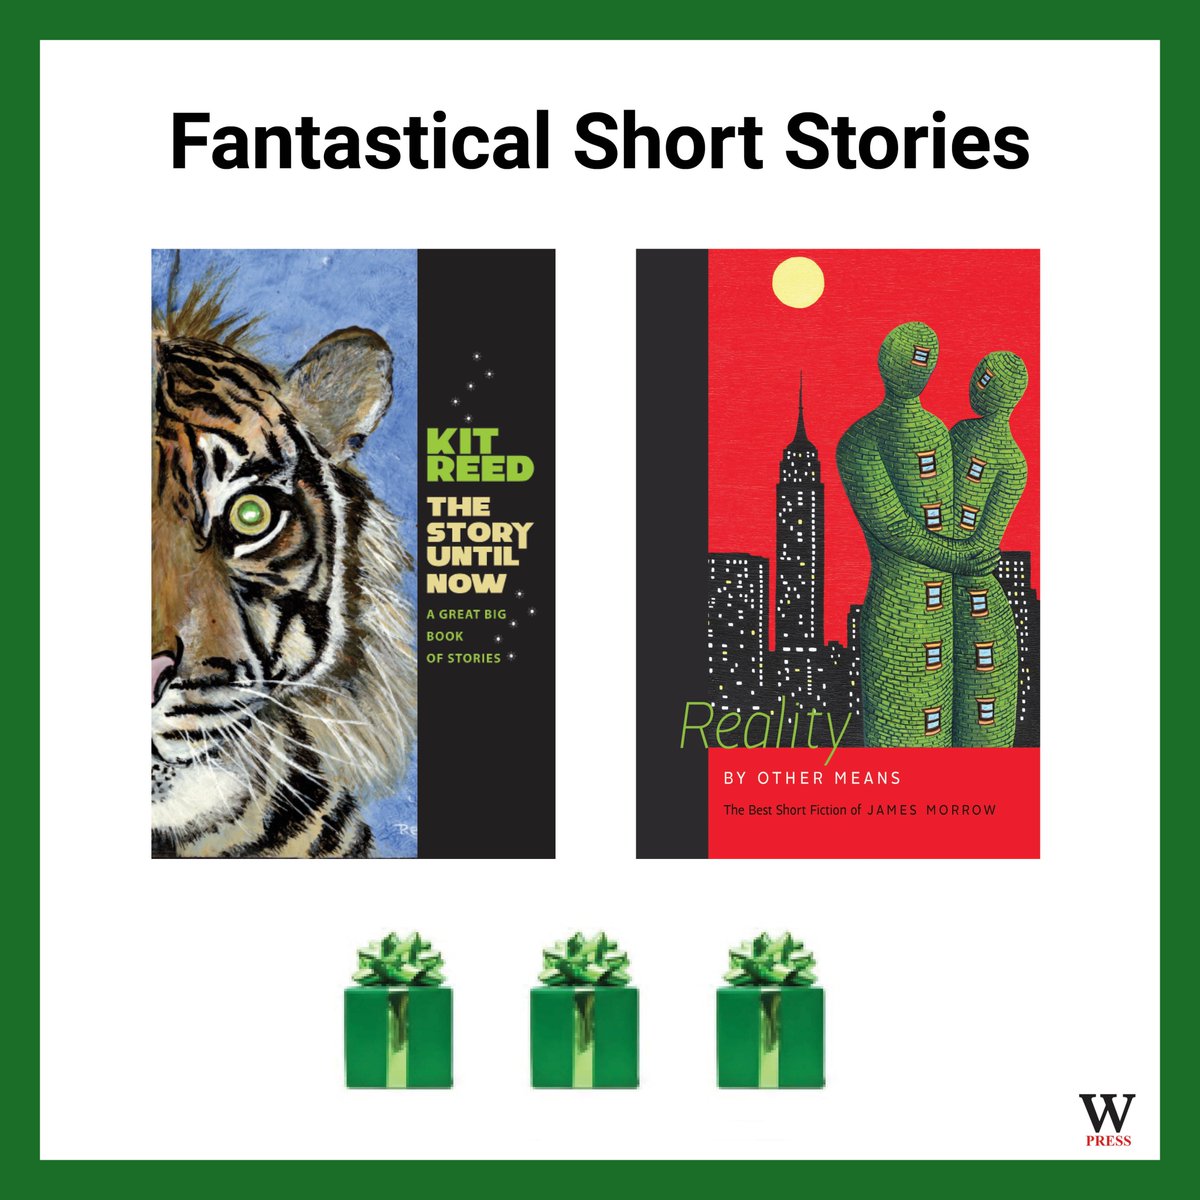 test Twitter Media - Happy Holidays! 
Fantastic, speculative tales by Kit Reed & James Morrow.
More ideas: https://t.co/e36q9hhywt  40% off with code Q401 
#Holidays2021 #HolidaySale #Christmas #Gifts #GiftBooks #ReadUP #SmartGifts #CreepyStories #FantasticFiction #ShortStories #KitReed #JamesMorrow https://t.co/A93xtqS6BX